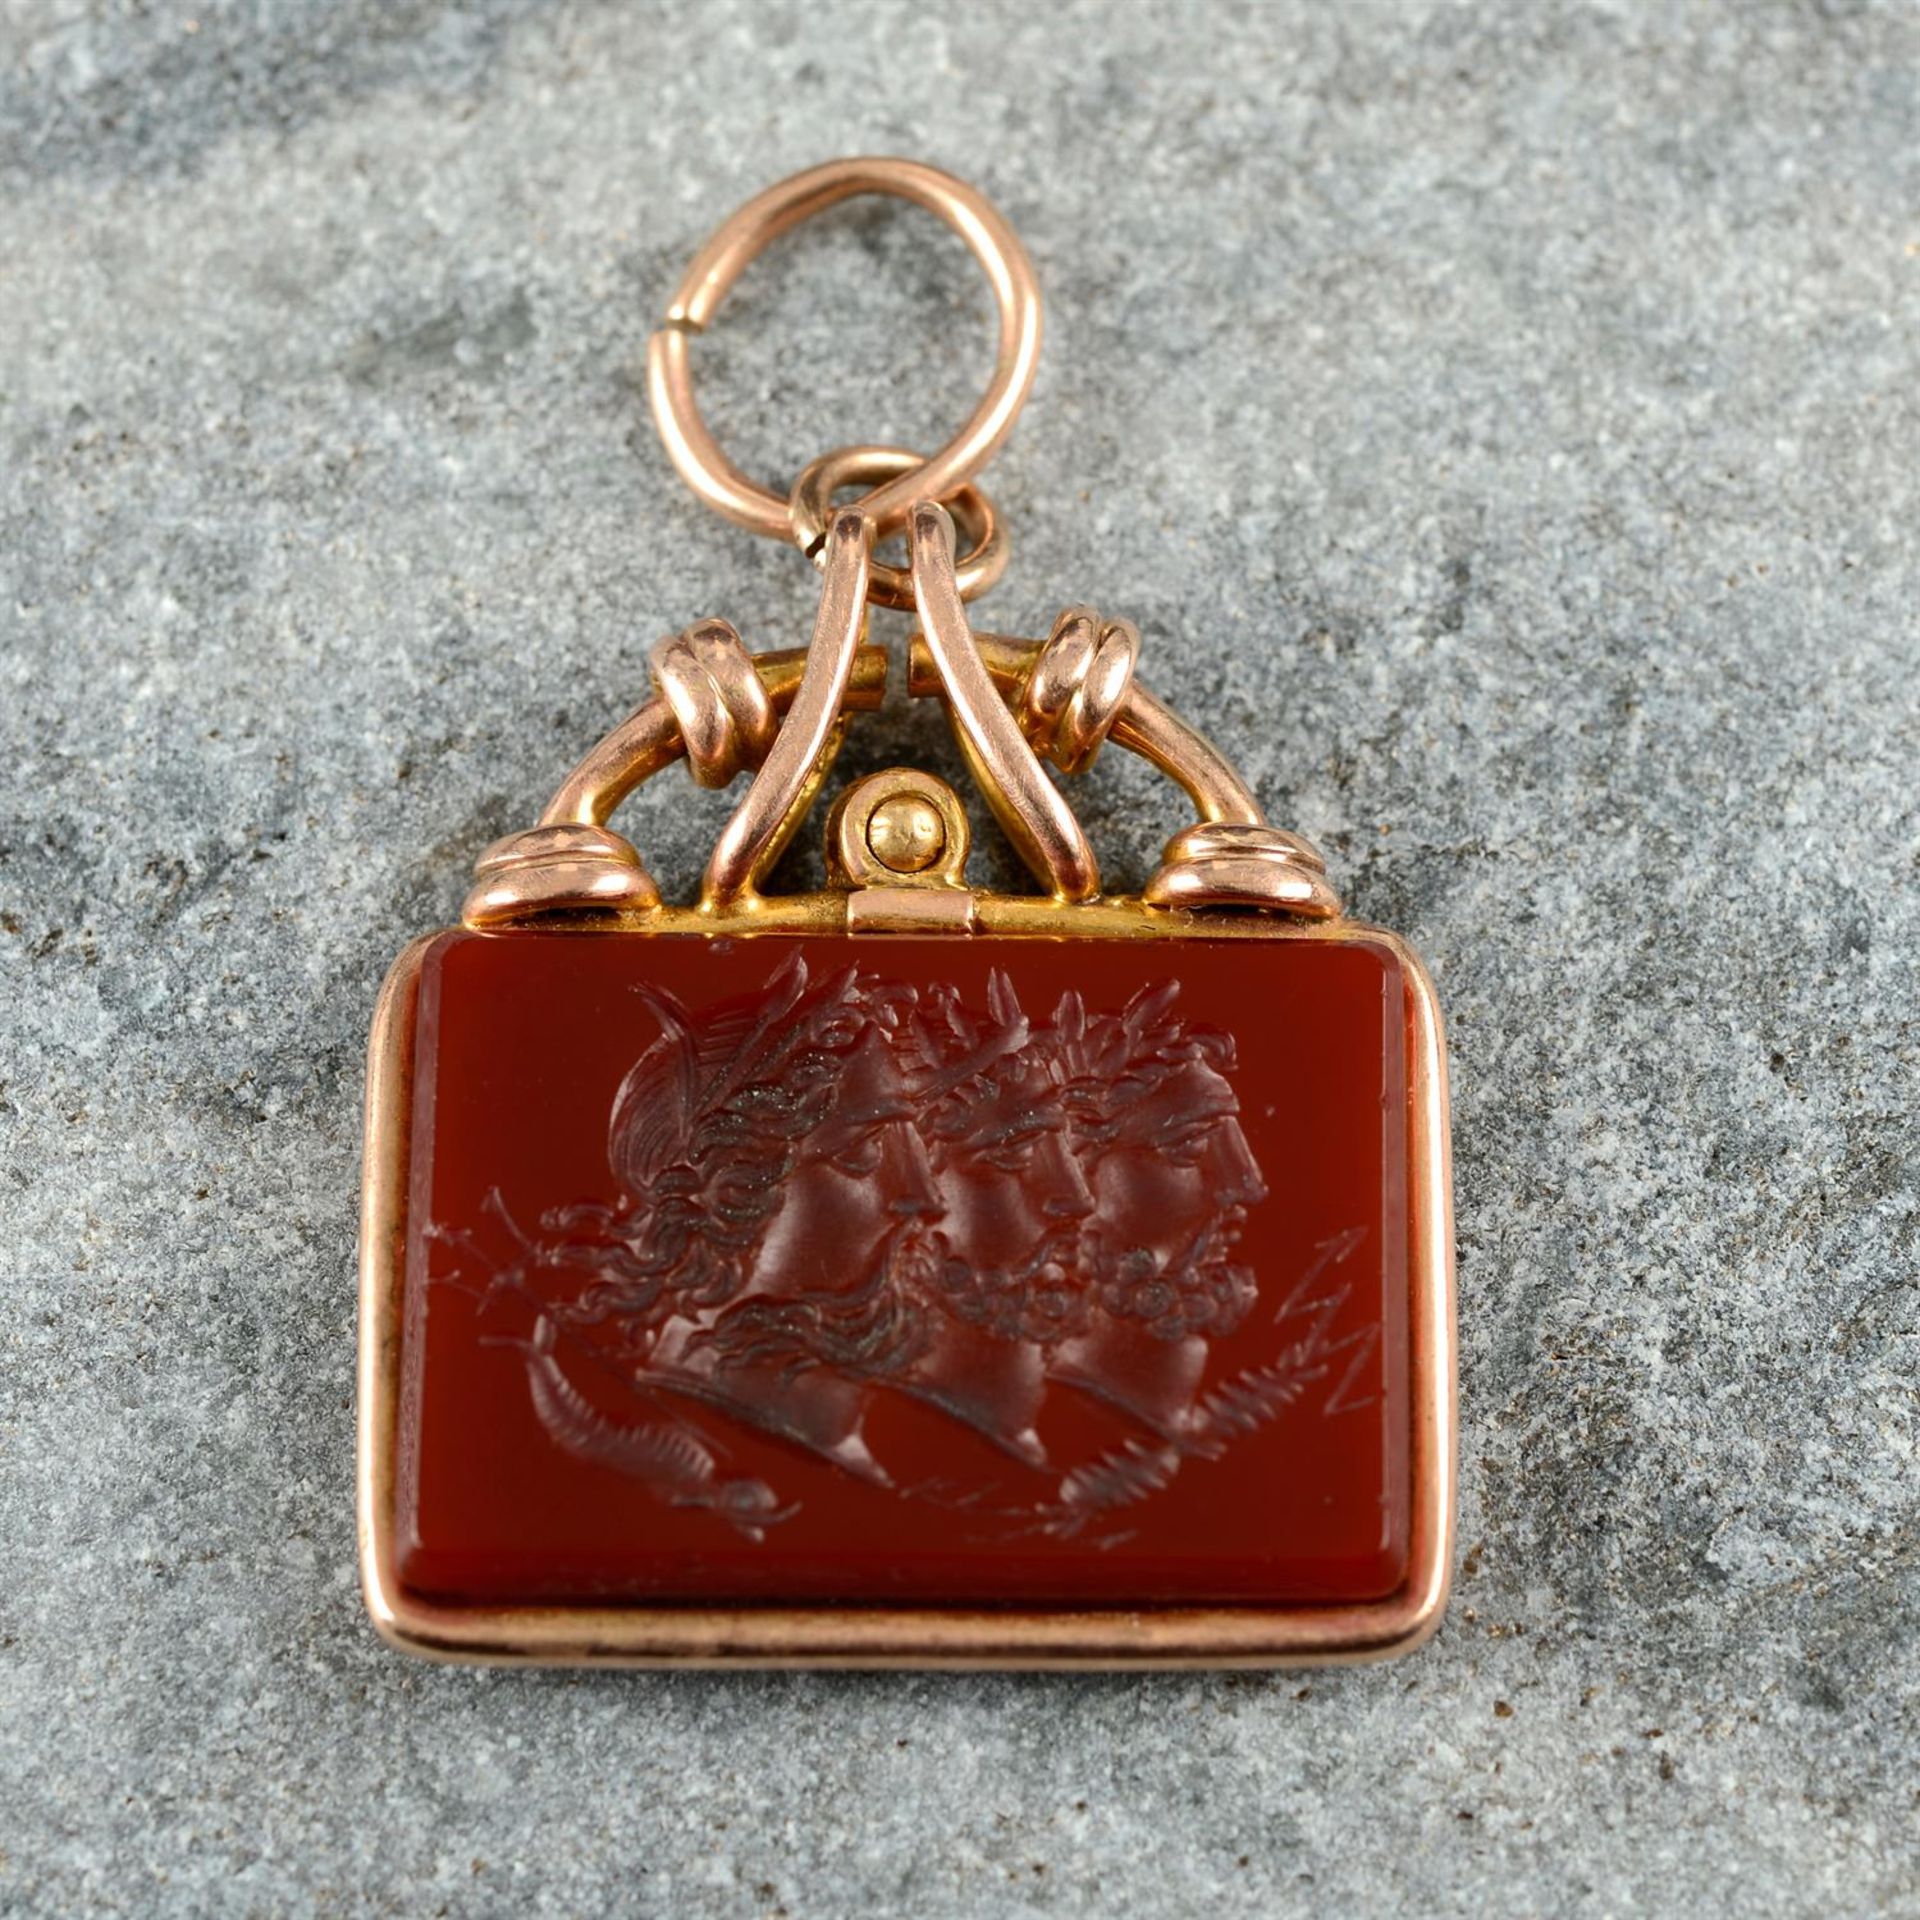 A 19th century gold carnelian intaglio pendant, carved to depict Zeus, Poseidon and Hades in